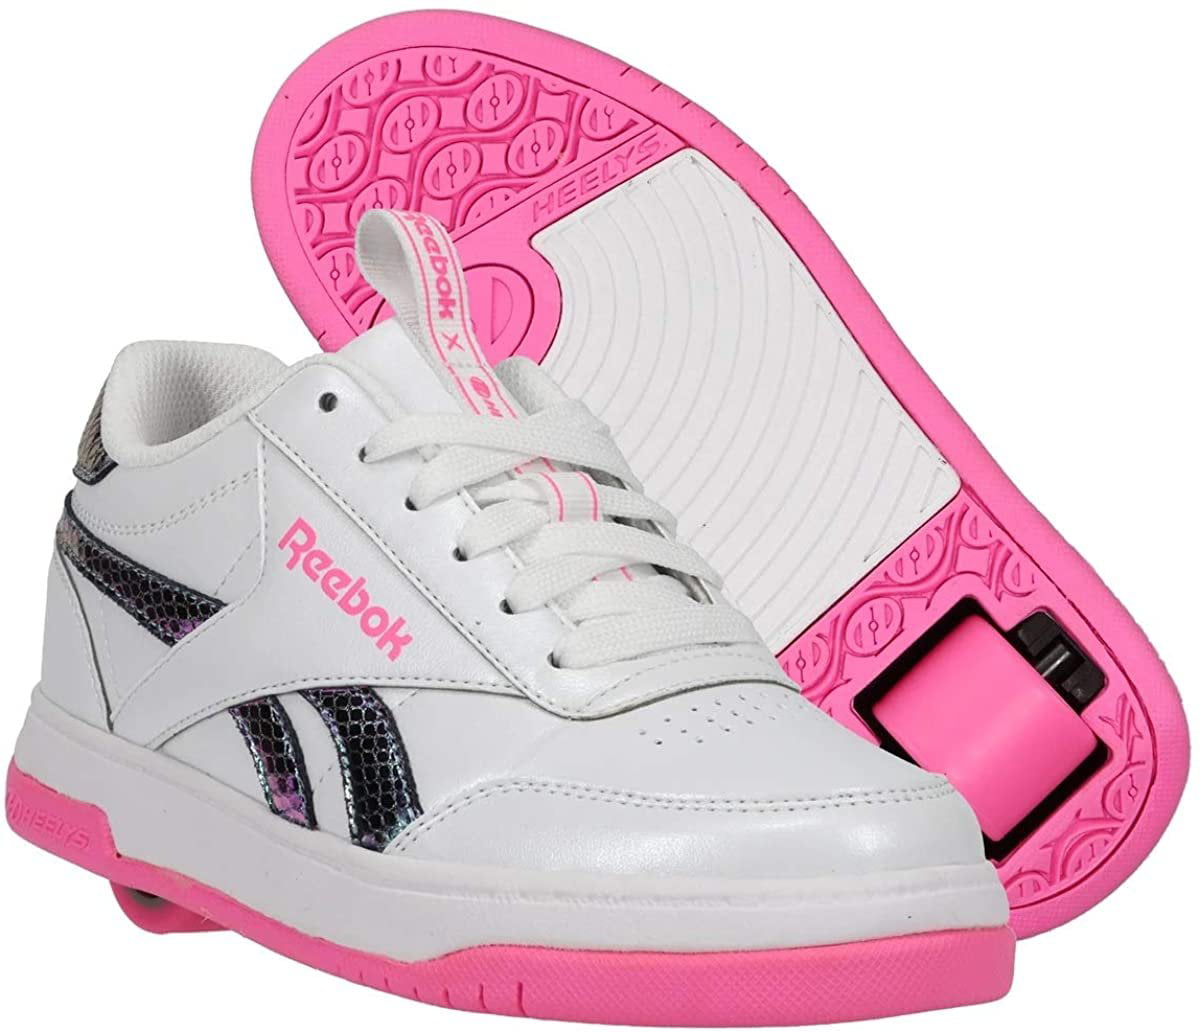 Buy > how to ride heelys for the first time > in stock